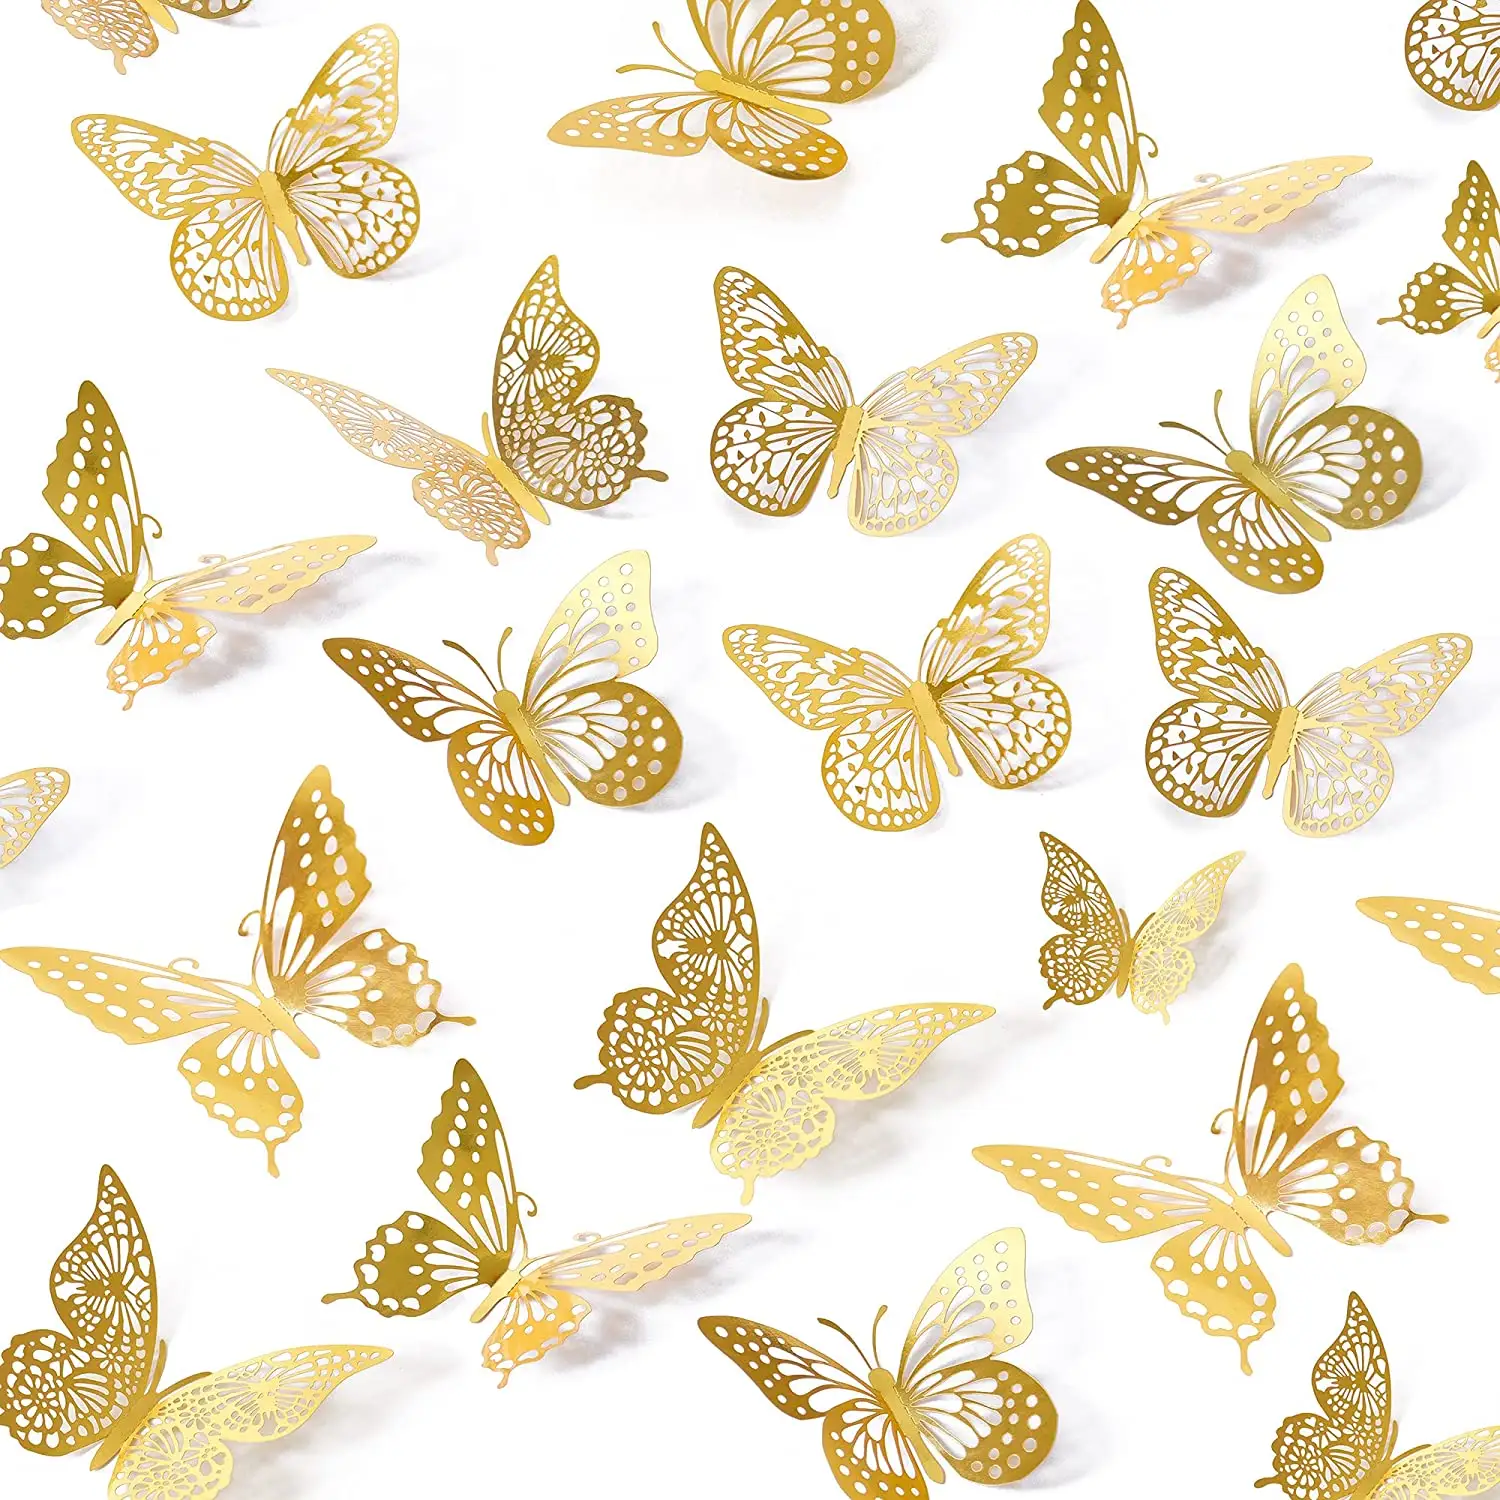 12 Pcs 3D Butterfly Wall Decor Gold Butterfly Decal For Birthday Wedding Party Room Decoration Stickers